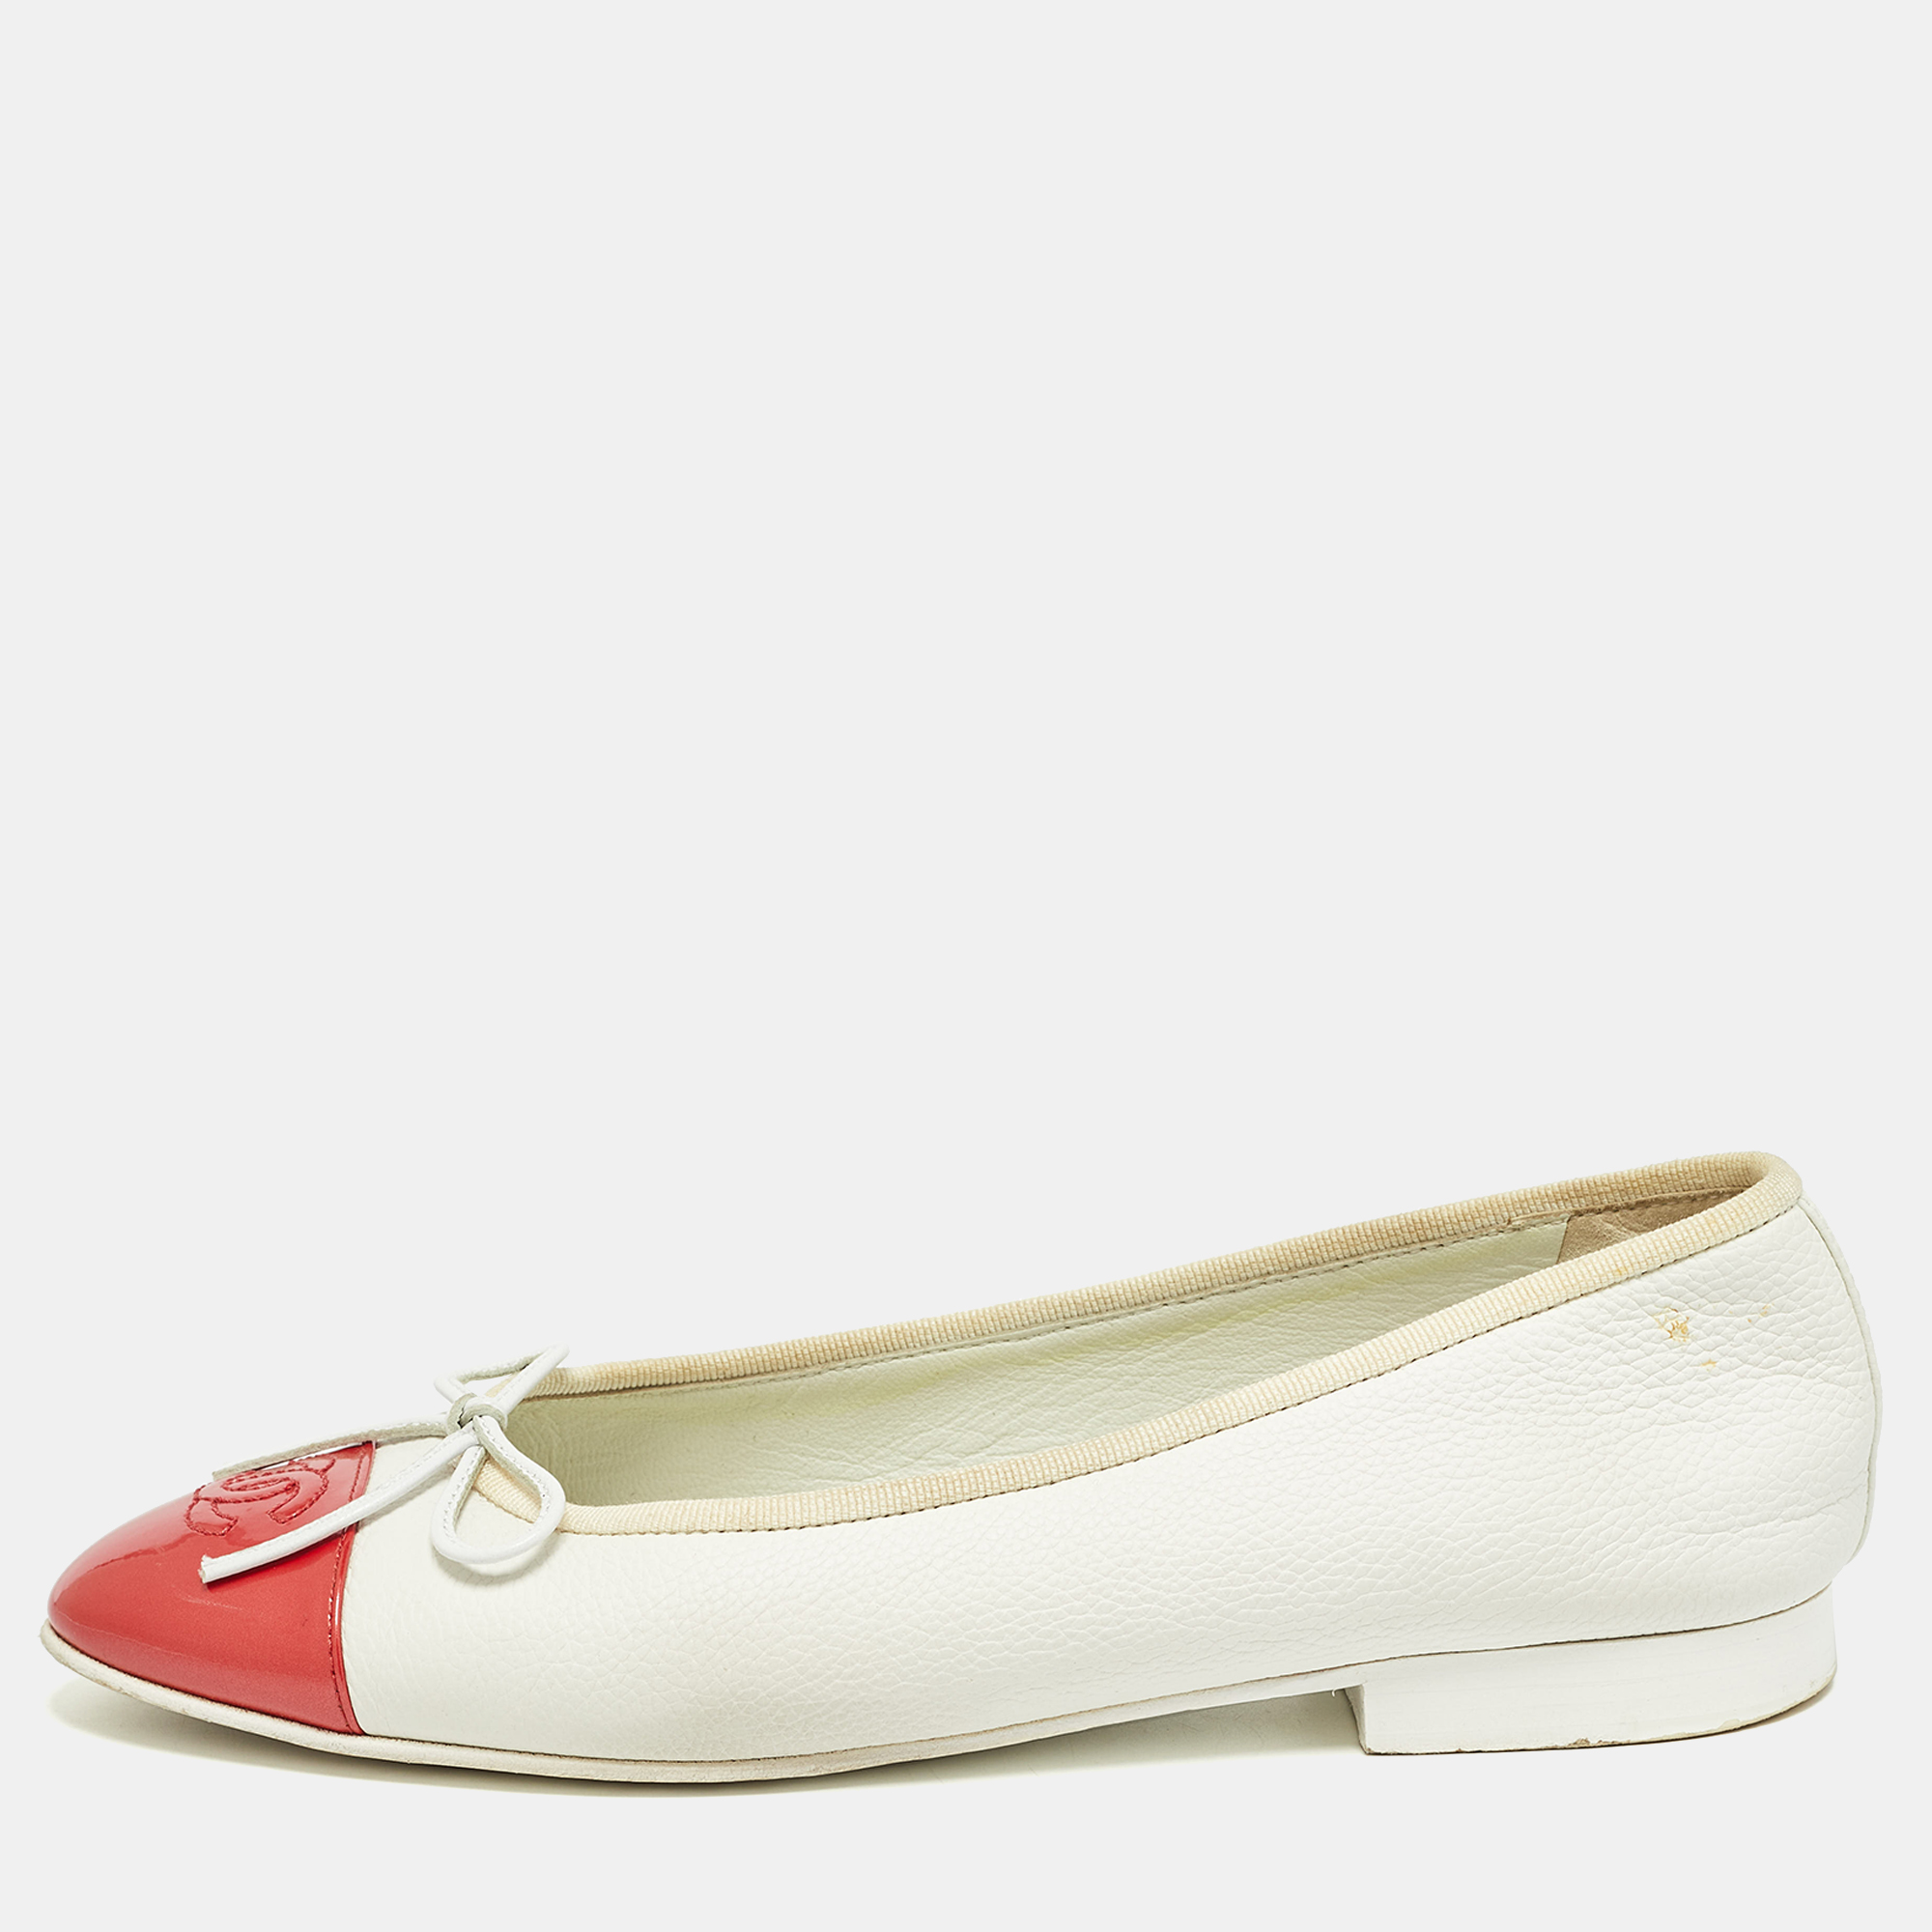 Chanel red/white leather and patent  cc  ballet flats size 37